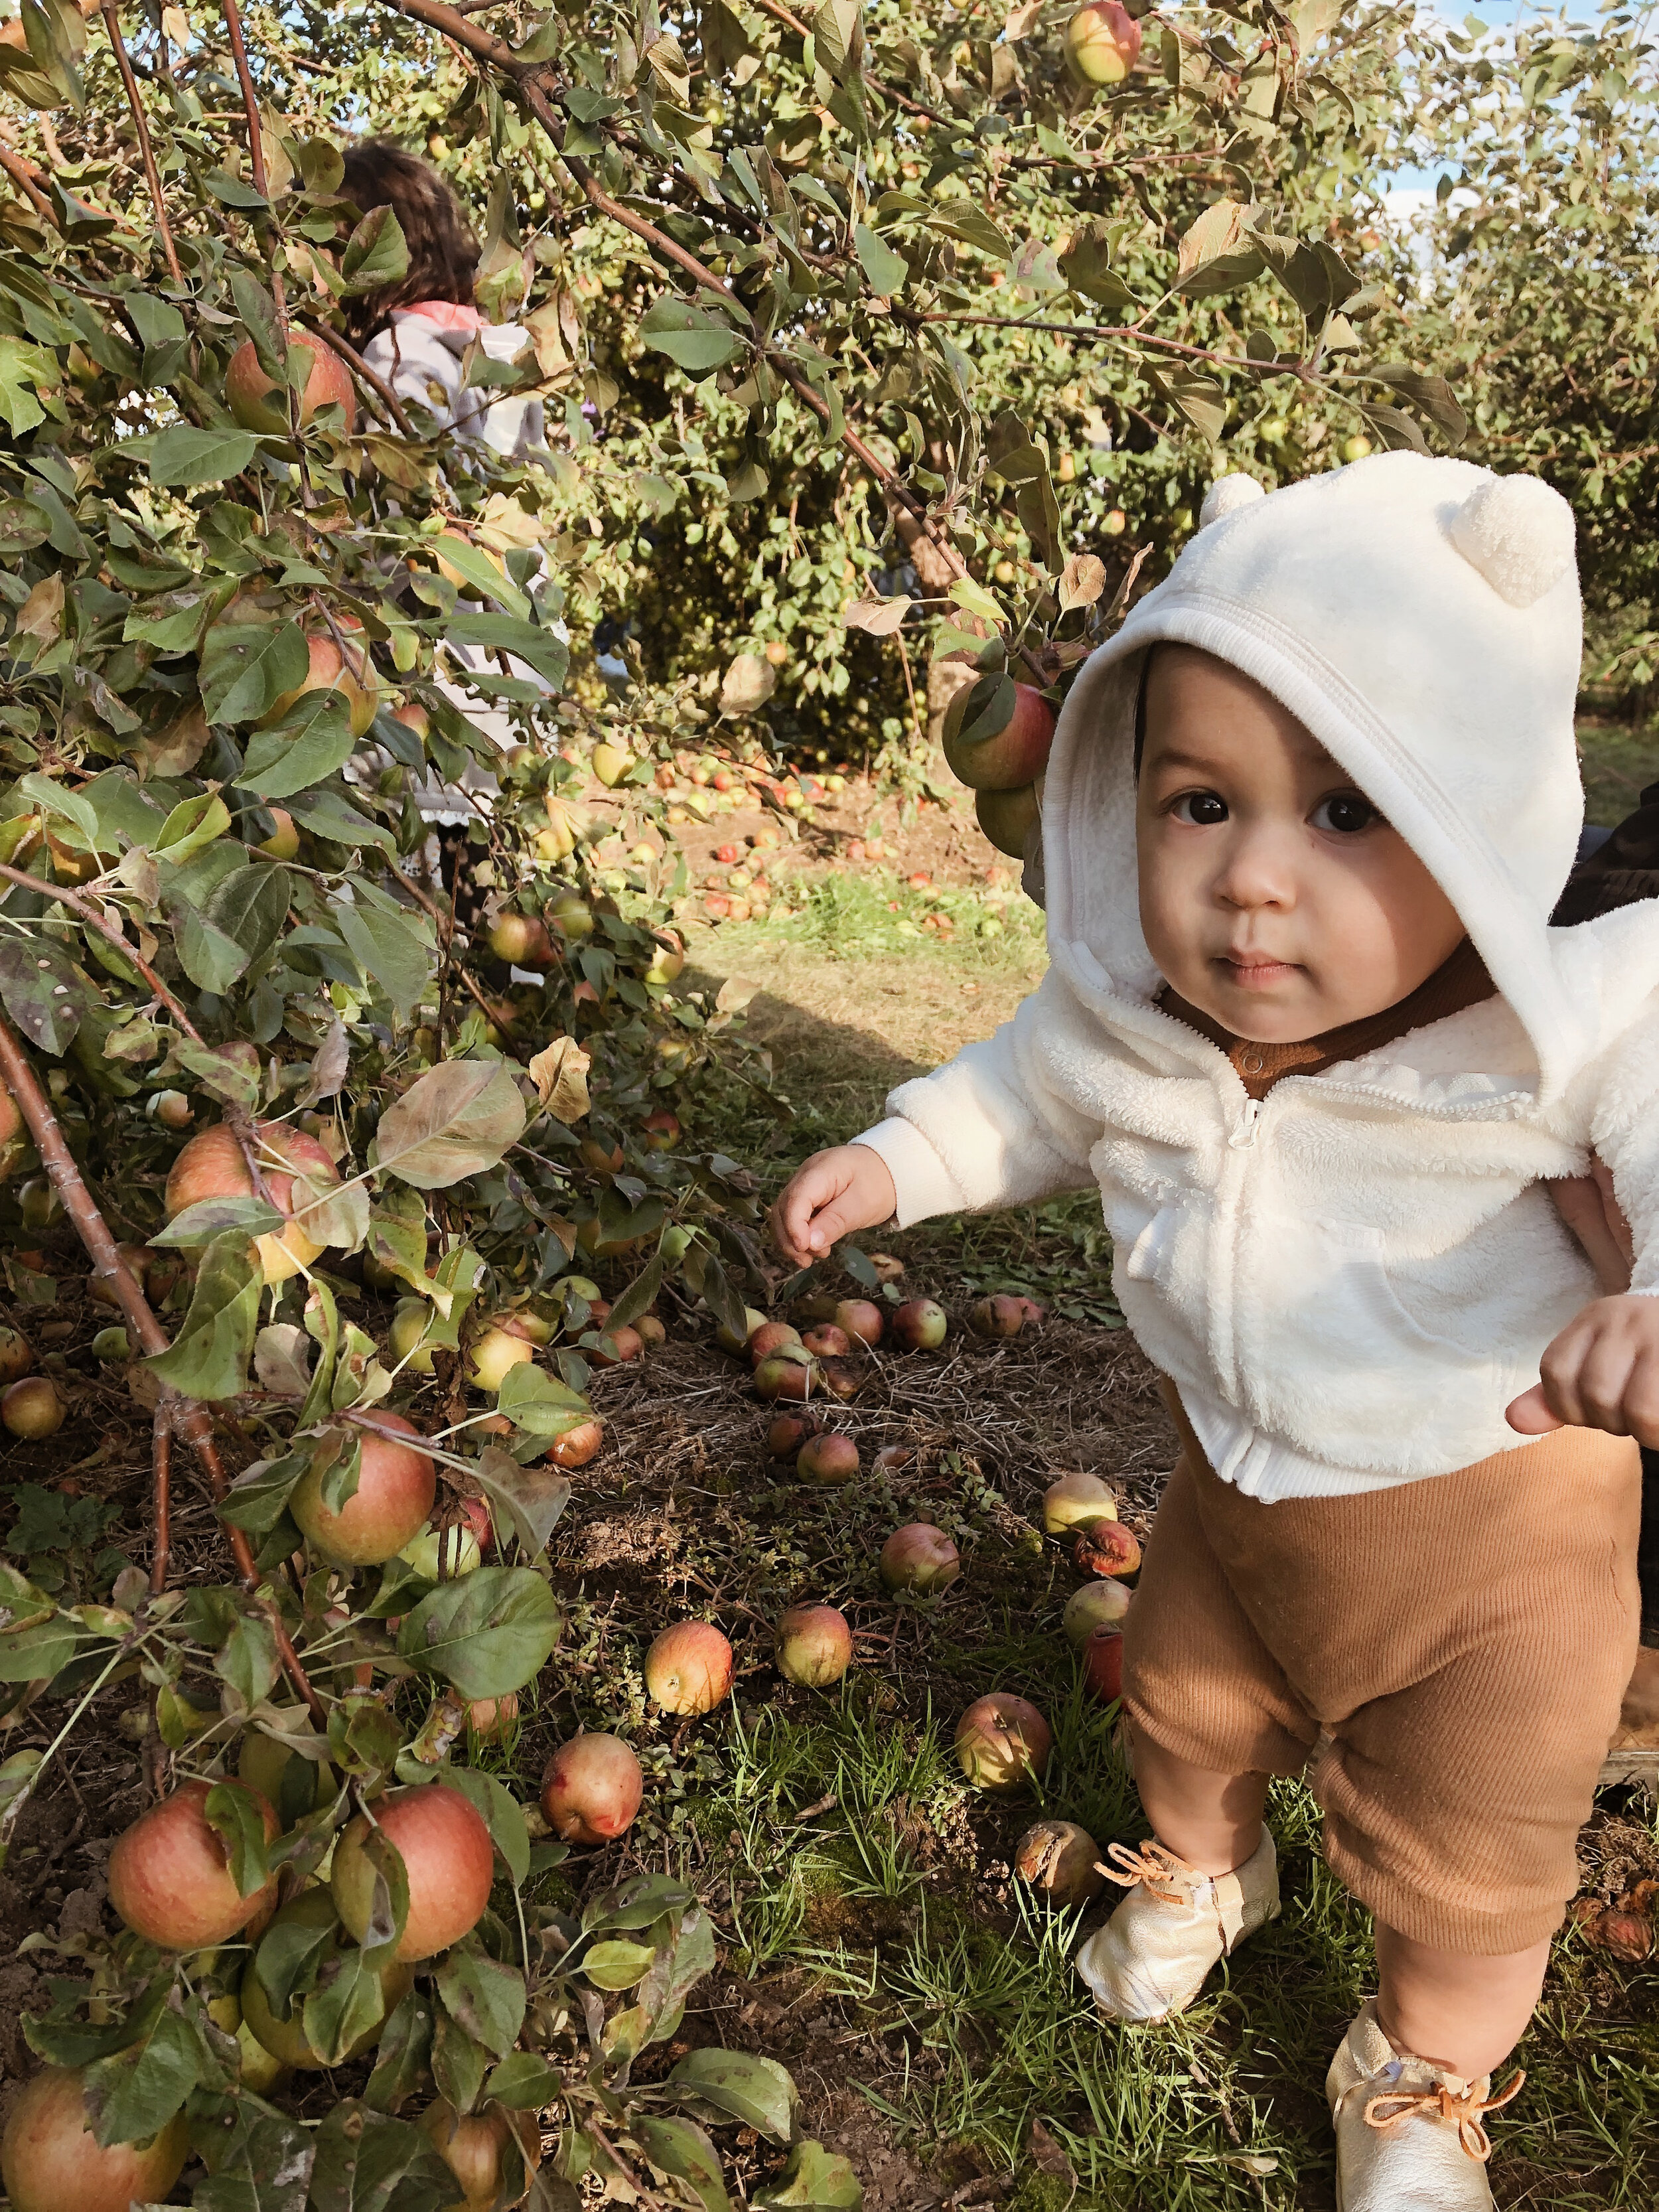 Took Jack Jack apple picking for the first time in 2019 at Aamodt’s apple farm.